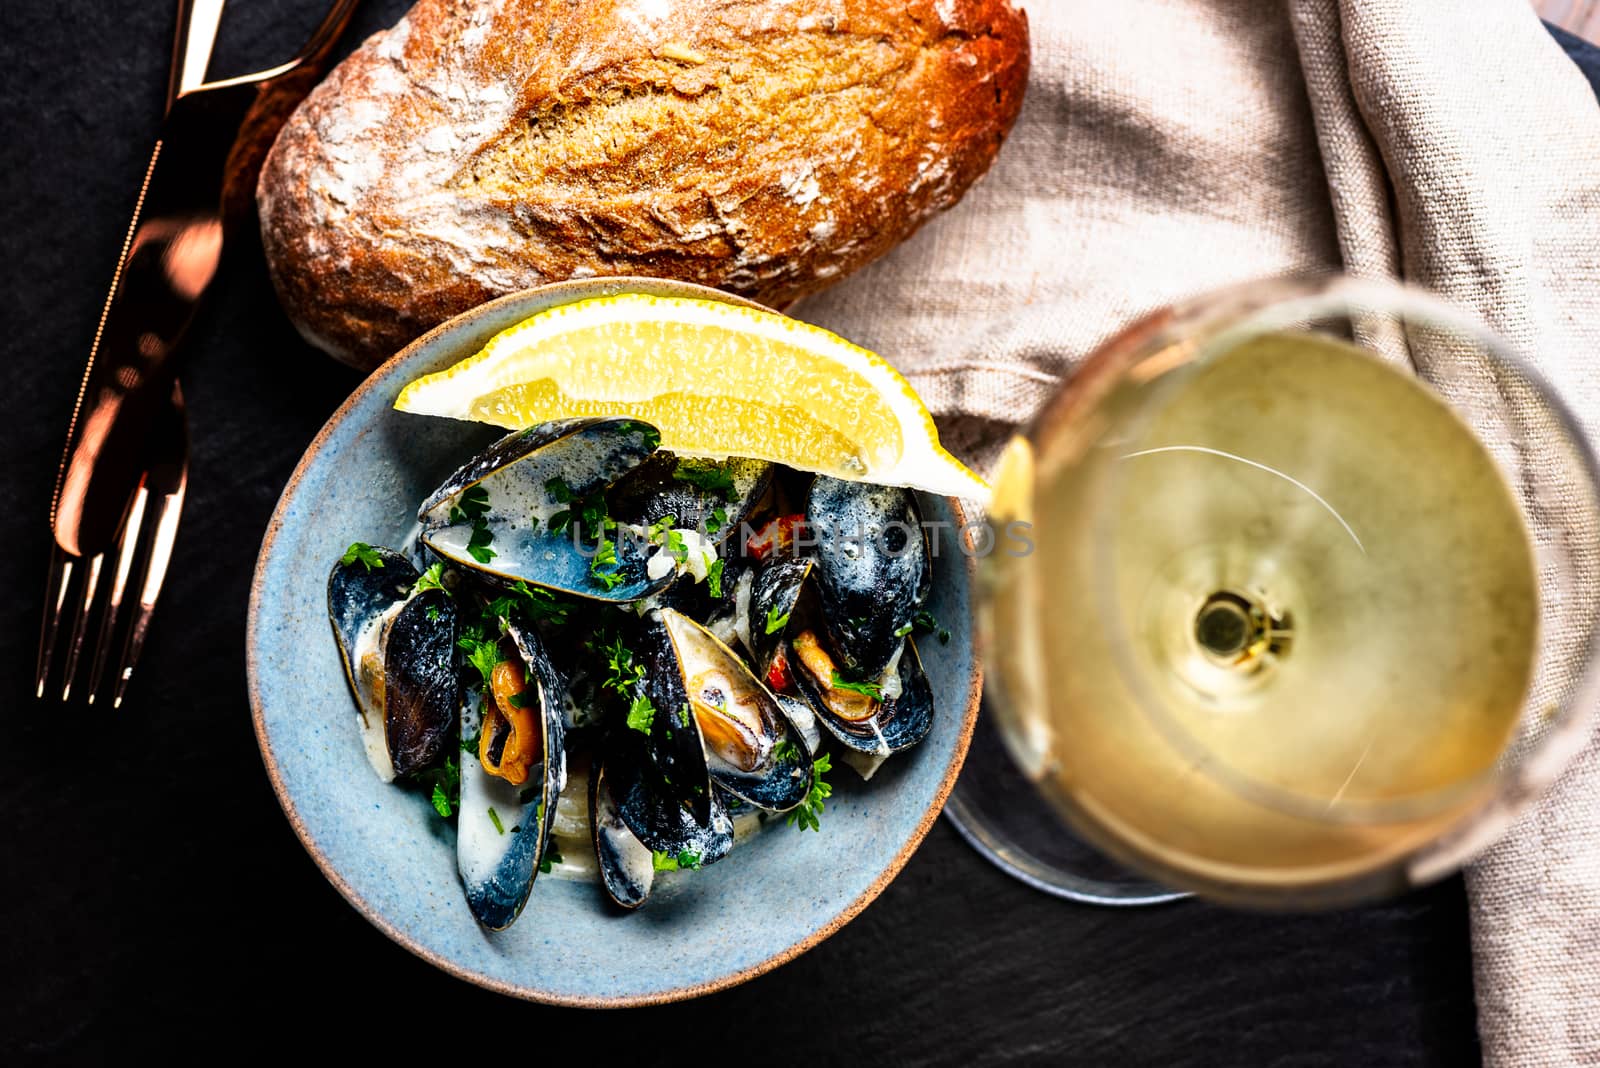 Cooked Blue mussels in clay dish with bread and white wine glass